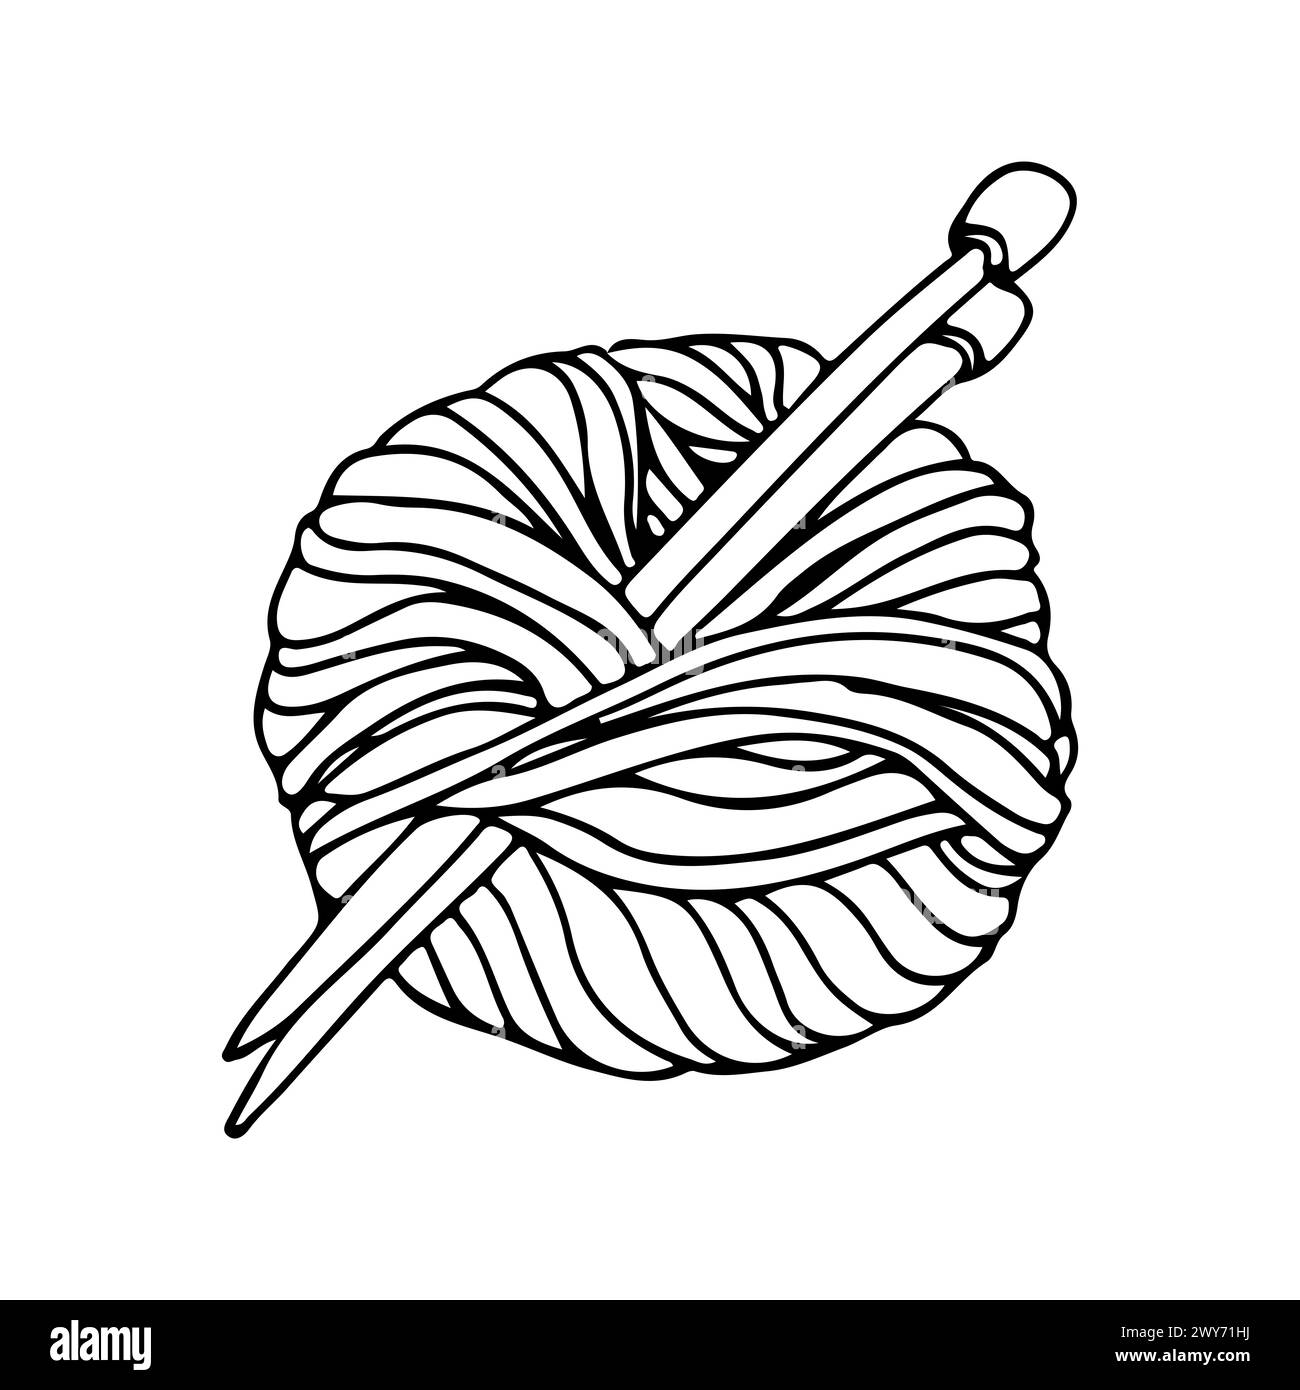 Threads And Knitting Needles Knitting Set Vector Linear Illustration For Coloring Logo Or 8830